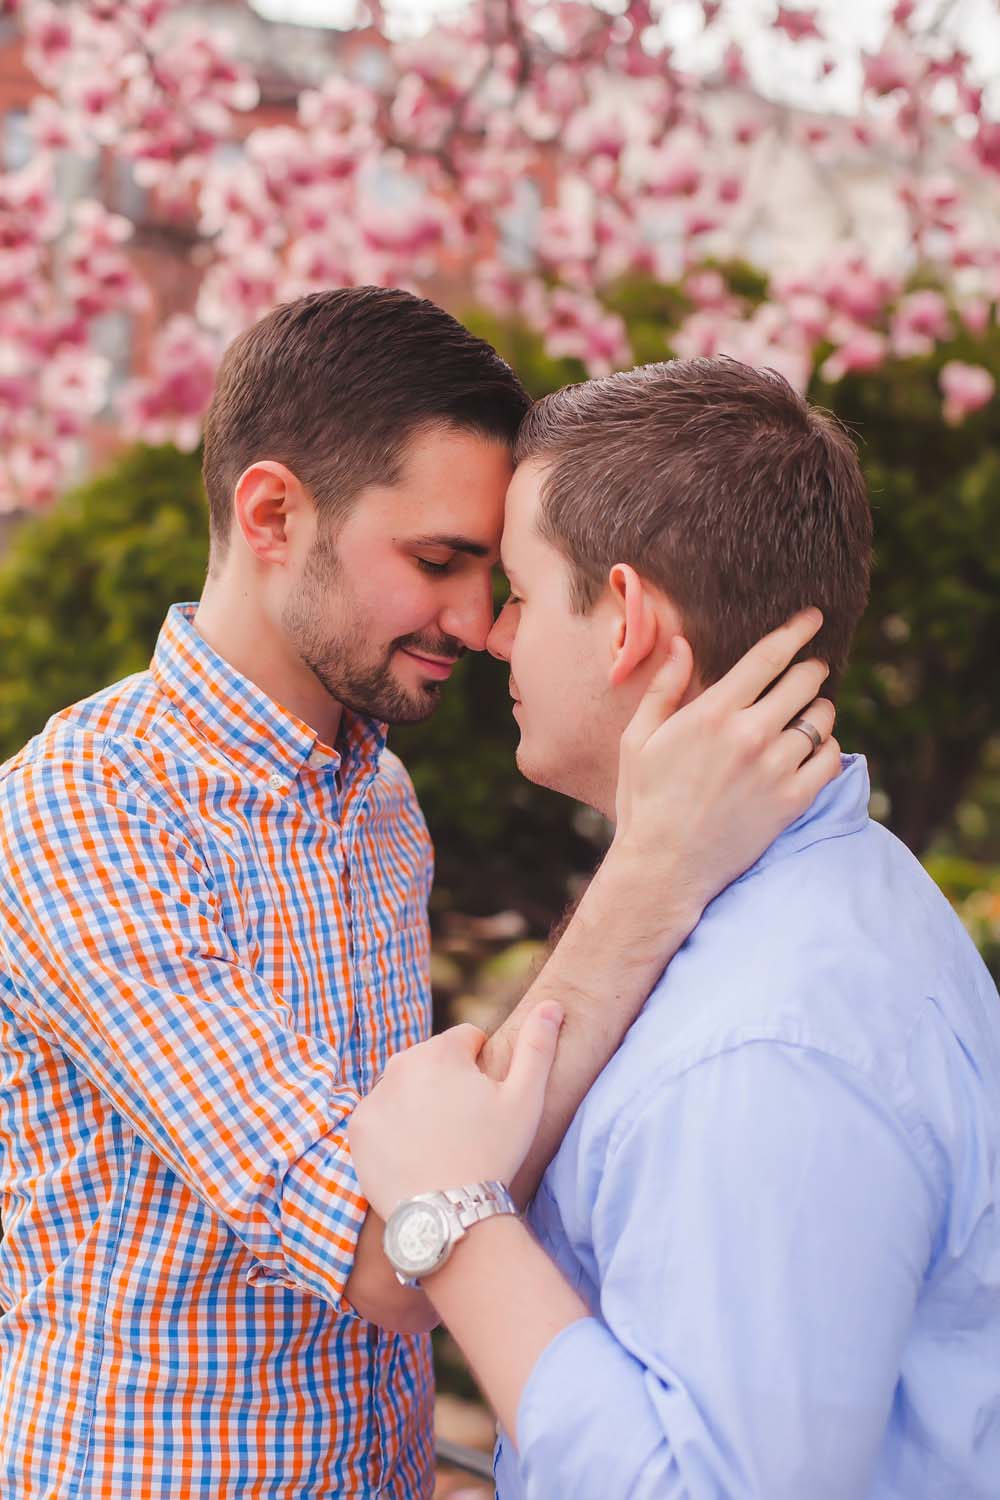 Engagement gift for gay couple - 🧡 Pin on Men in Love.